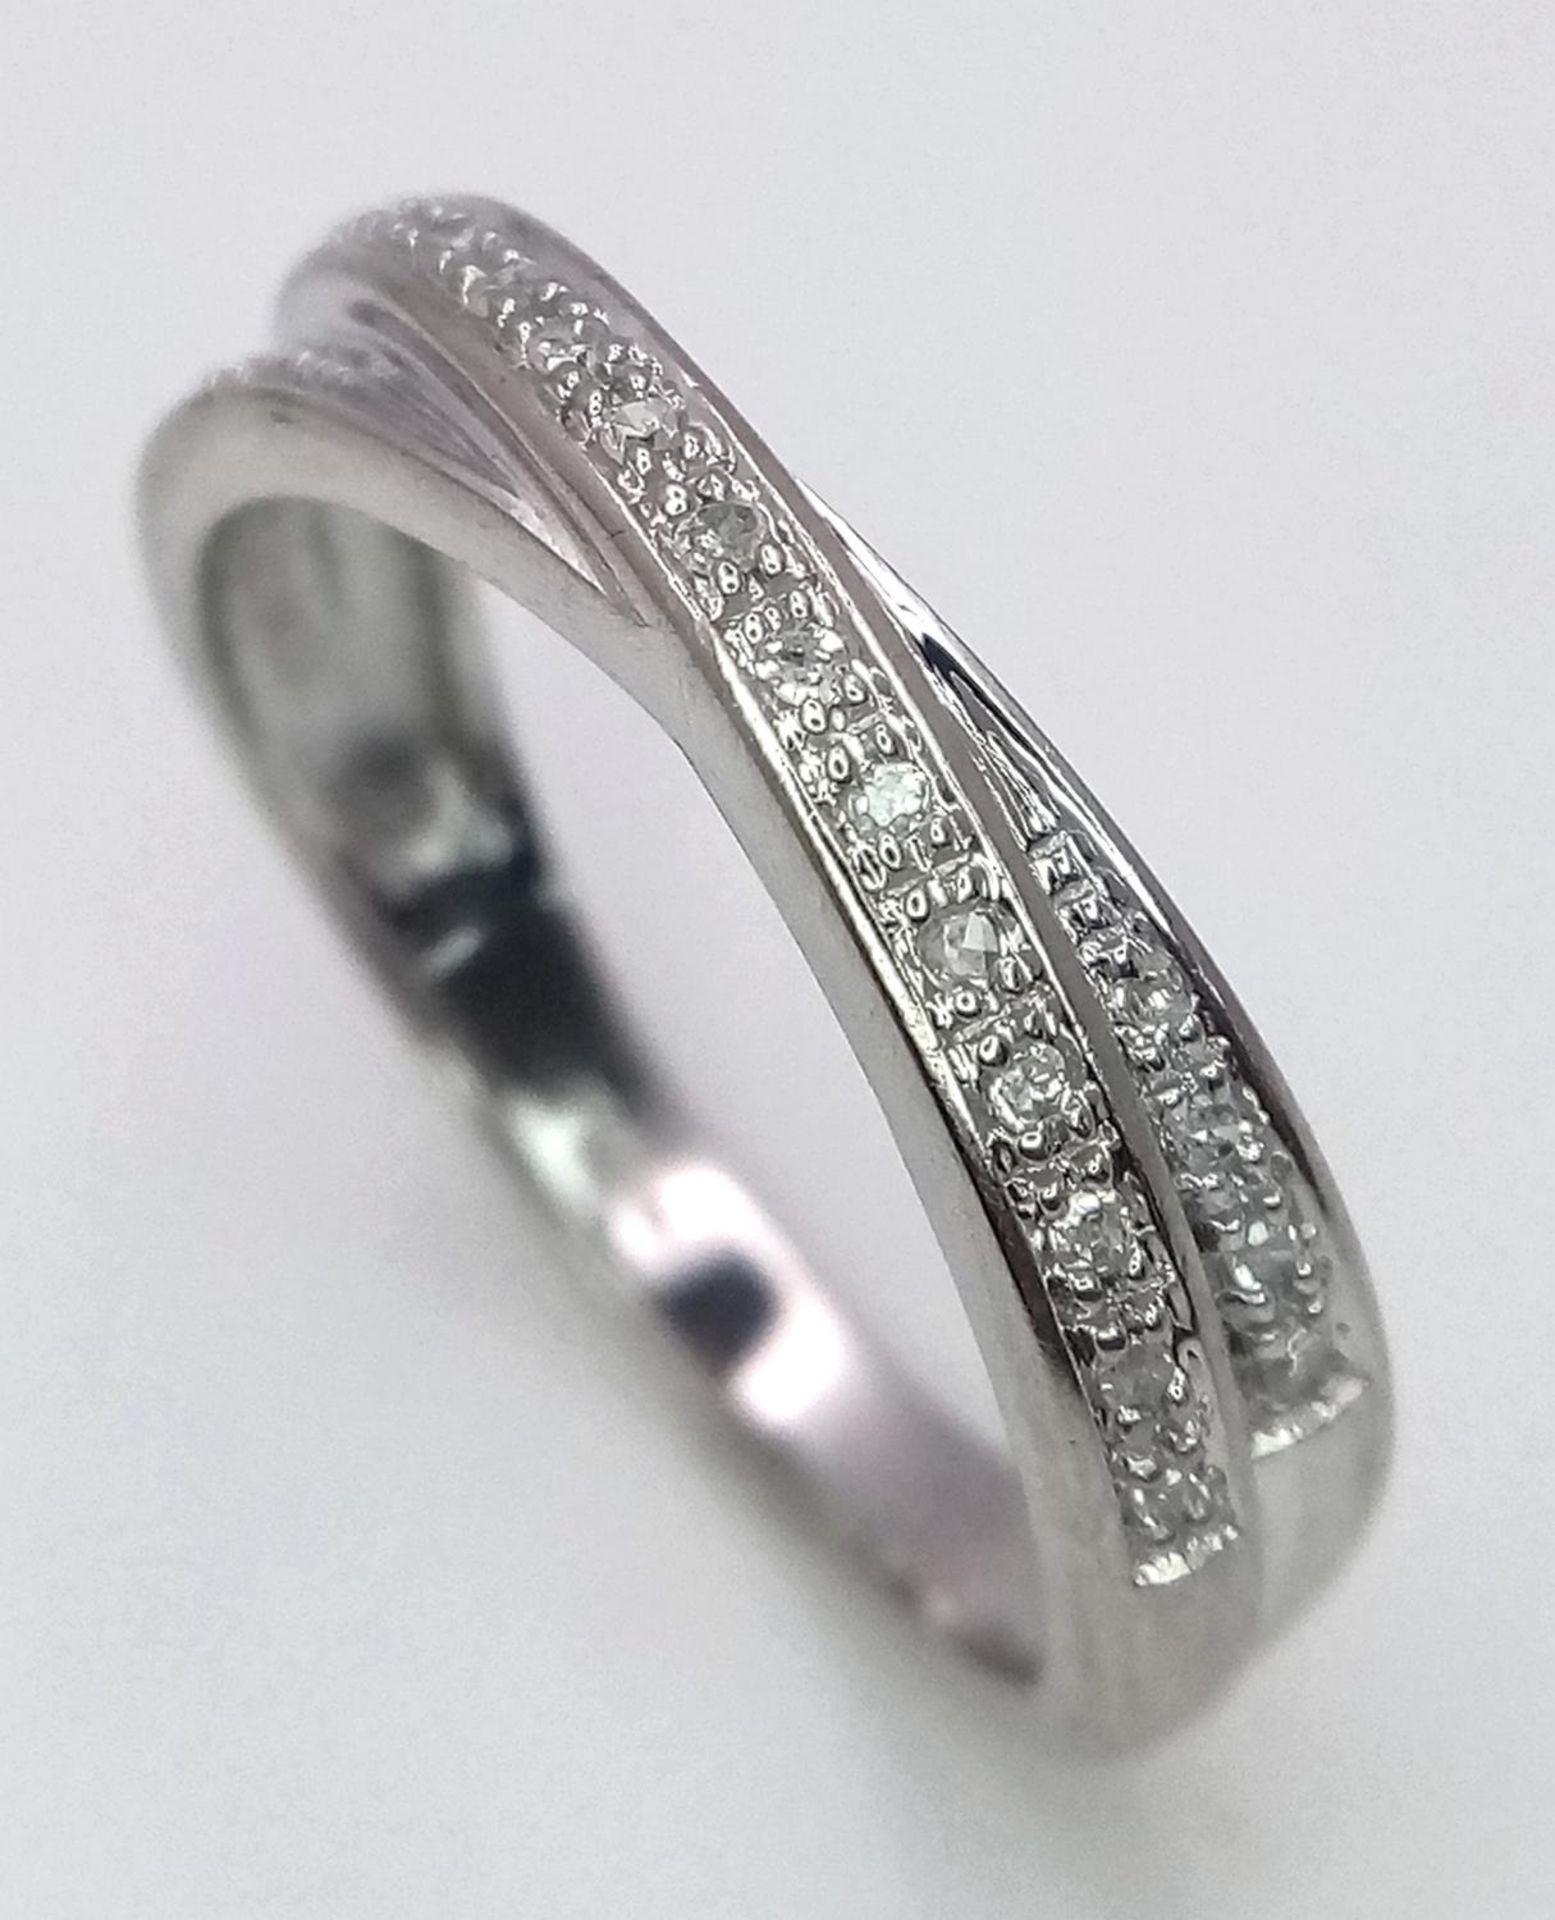 A 9K WHITE GOLD DIAMOND SET 2 ROW CROSSOVER RING 2.7G SIZE O/P. SC 9071 - Image 2 of 6